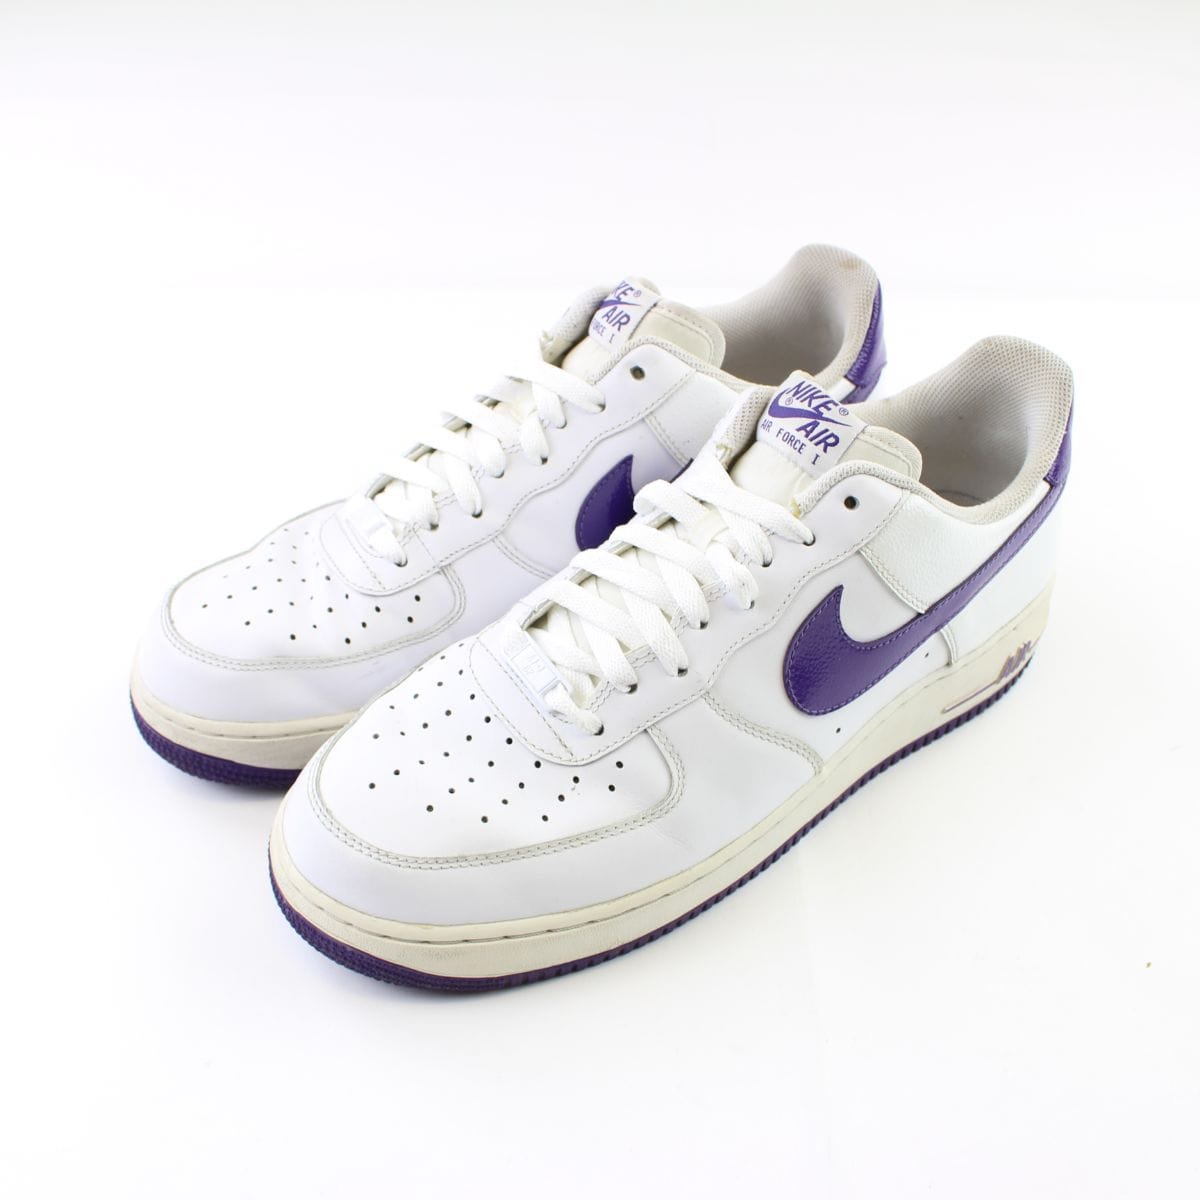 white nike shoes with purple swoosh